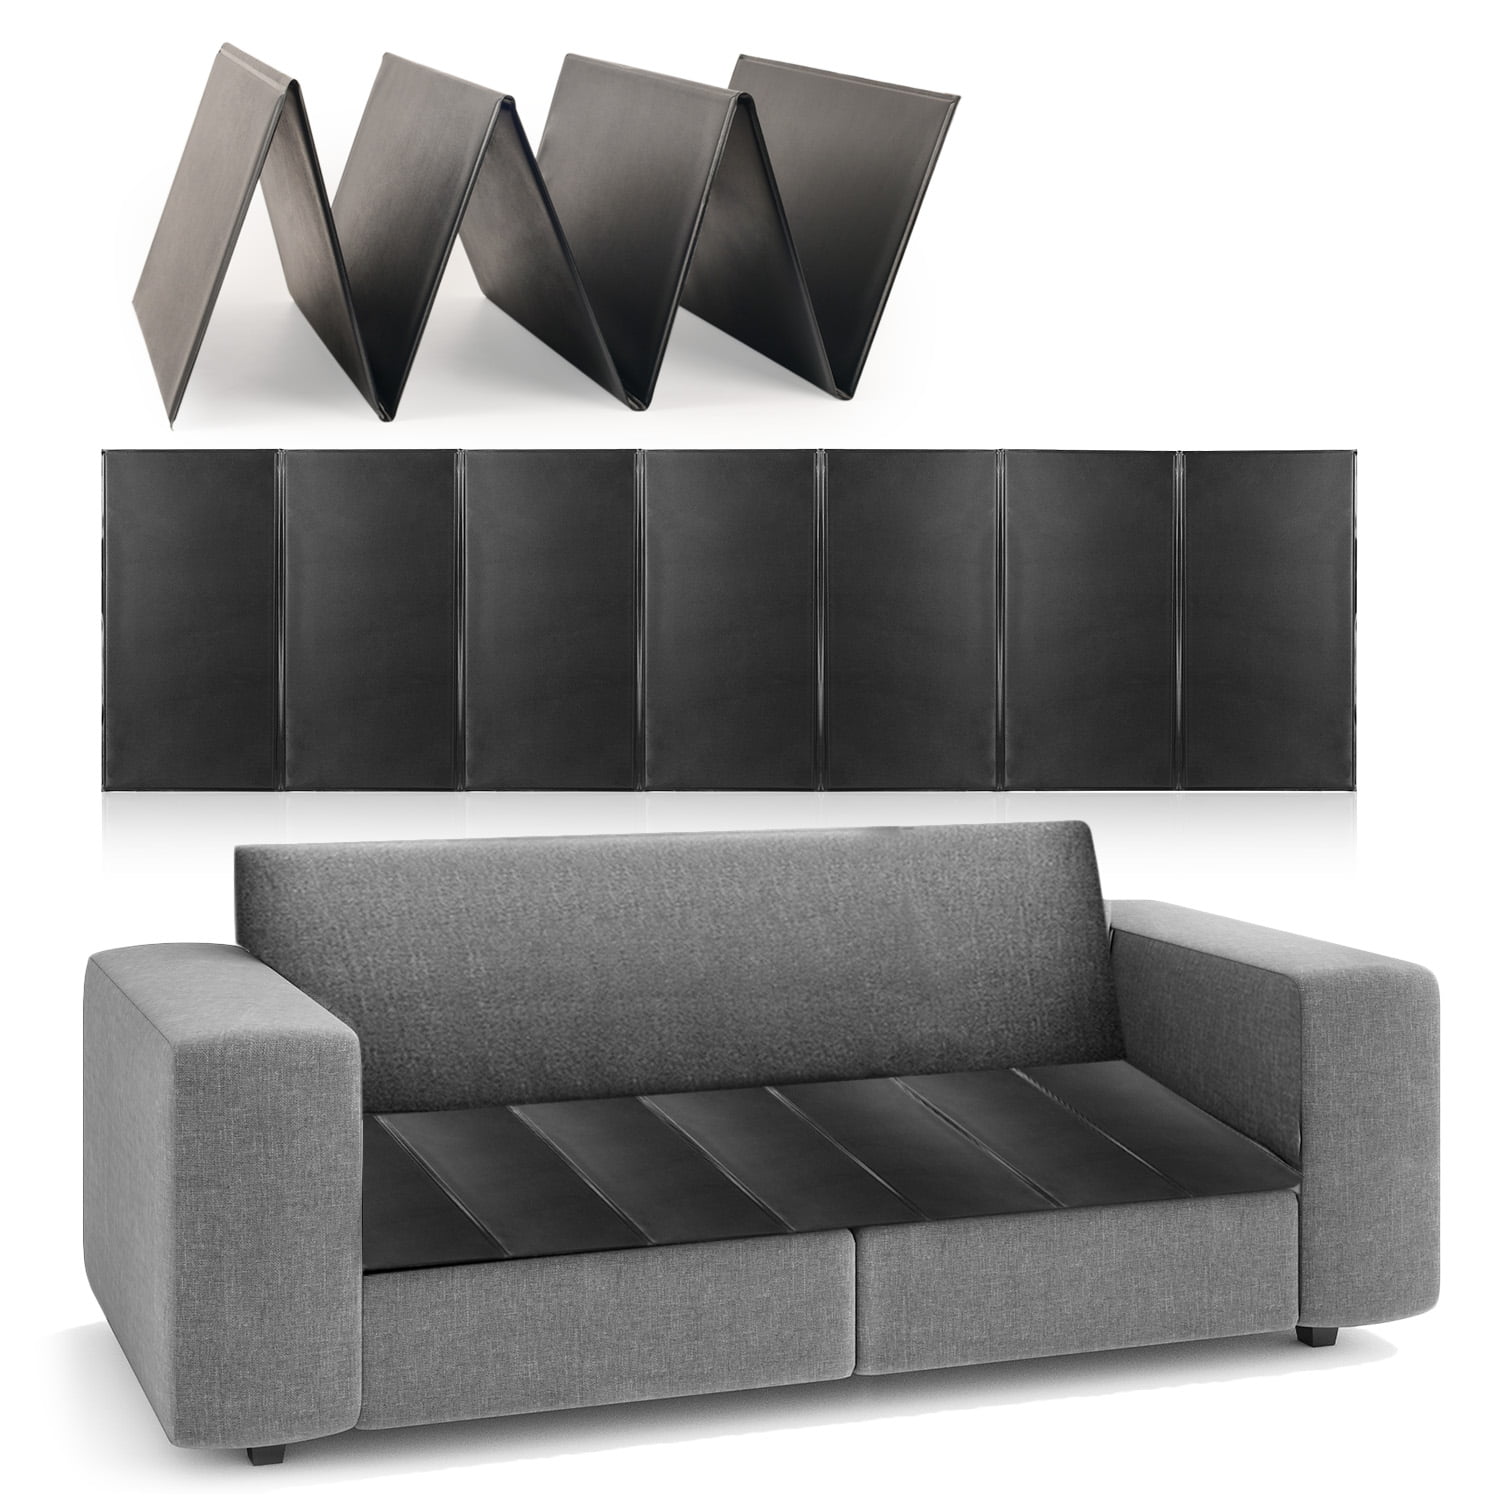 Stronger Furniture Cushion Support, Sofa Under Cushion Support Panel